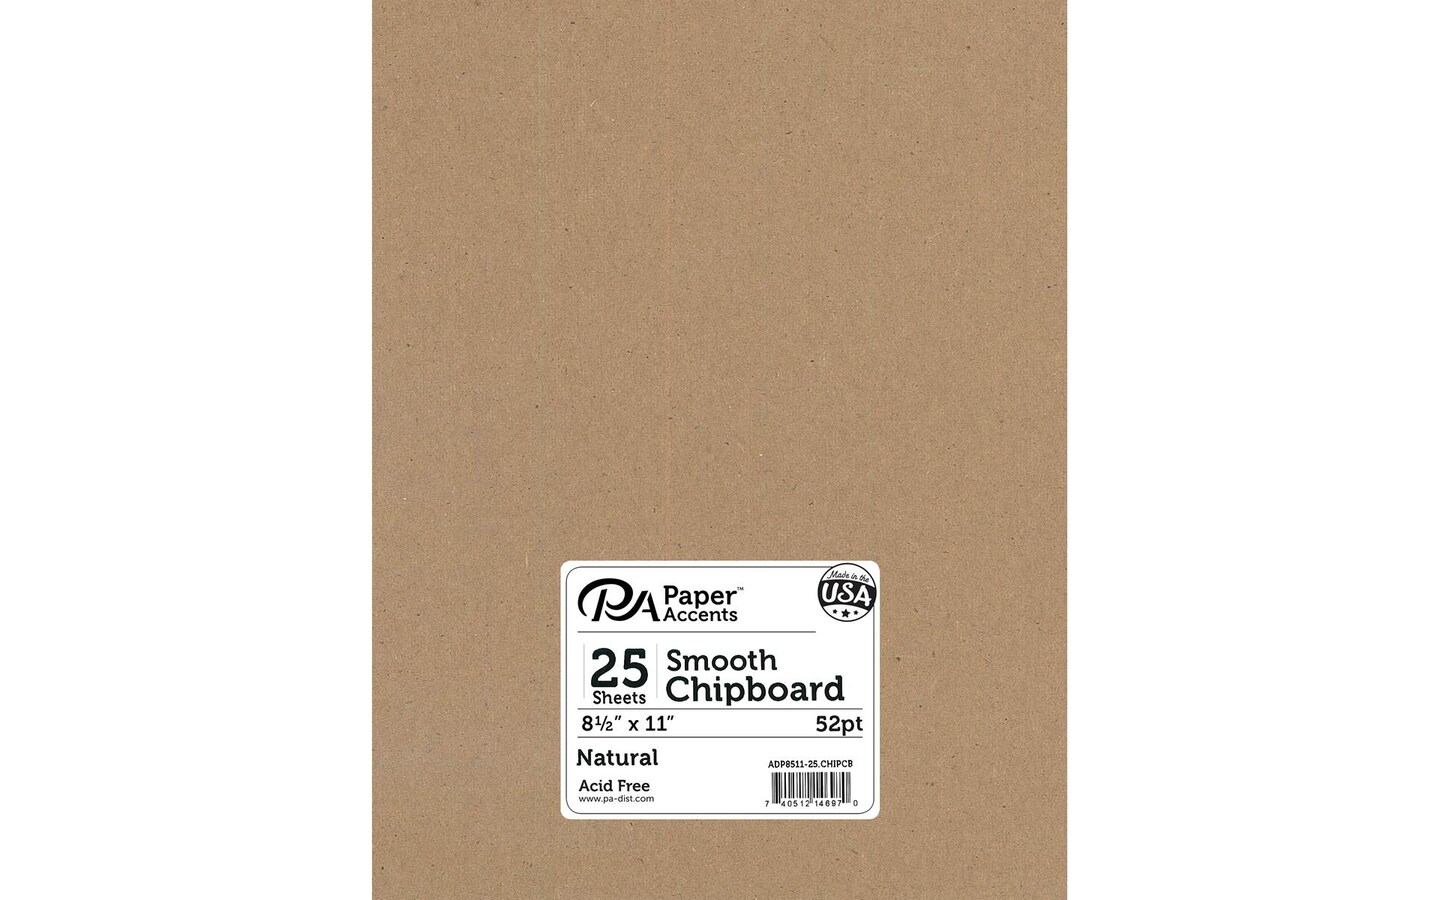 Chipboard 8.5x11 1X Heavy 52pt 25pcPk Natural